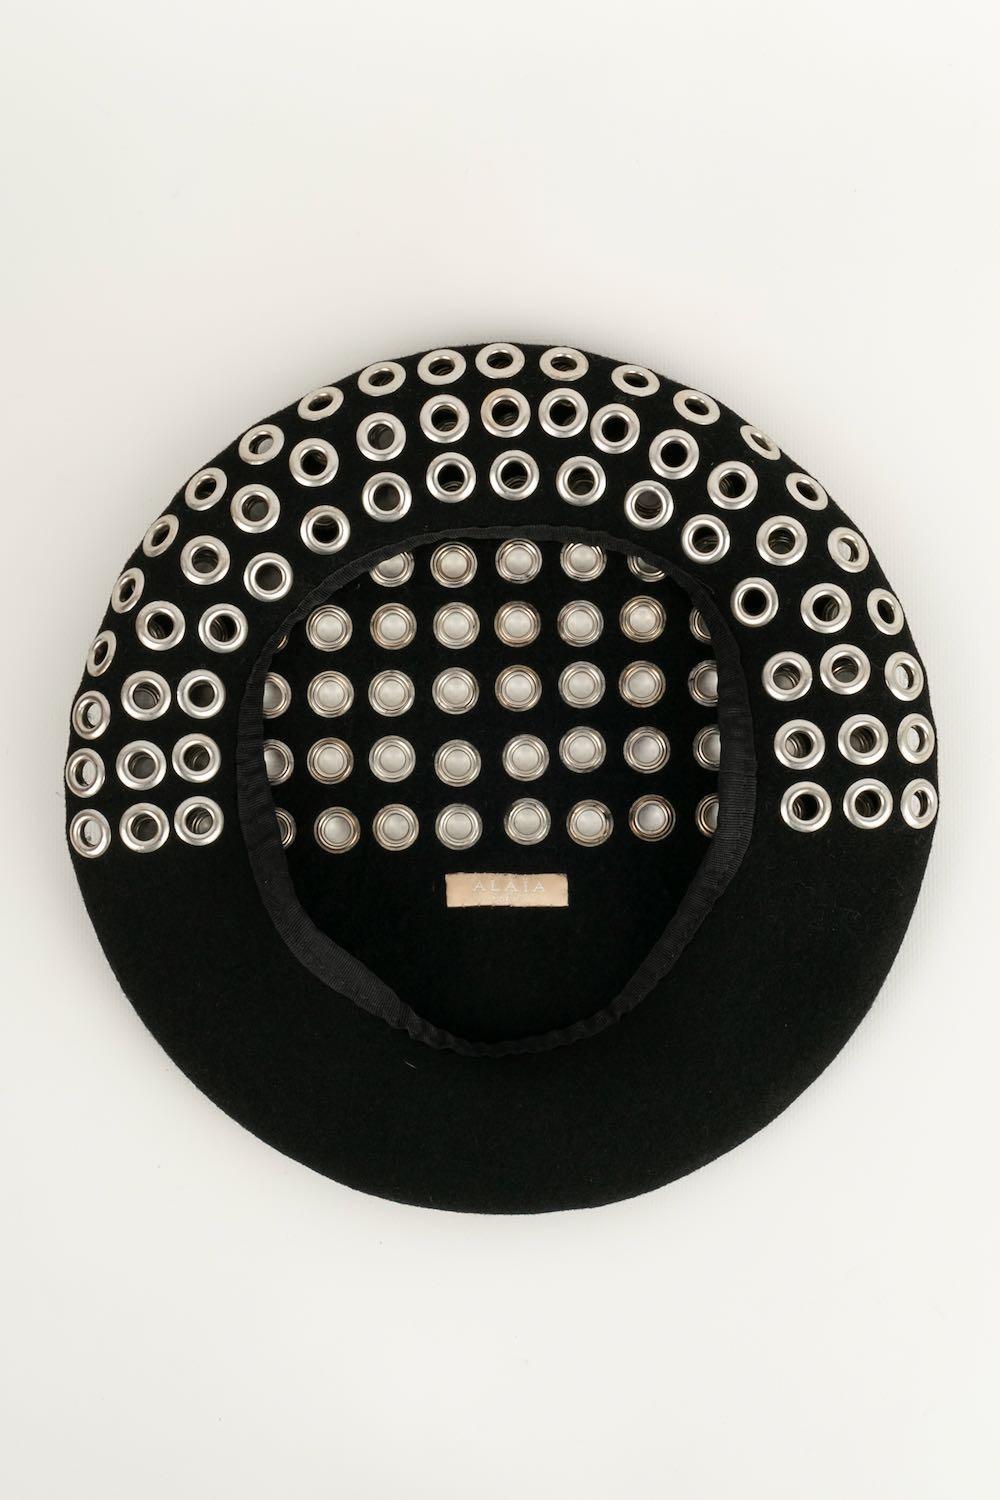 Alaïa -Beret in black virgin wool embellished with silver rivets.

Additional information:
Condition: Very good condition
Dimensions: Size 57

Seller Reference: CHP16